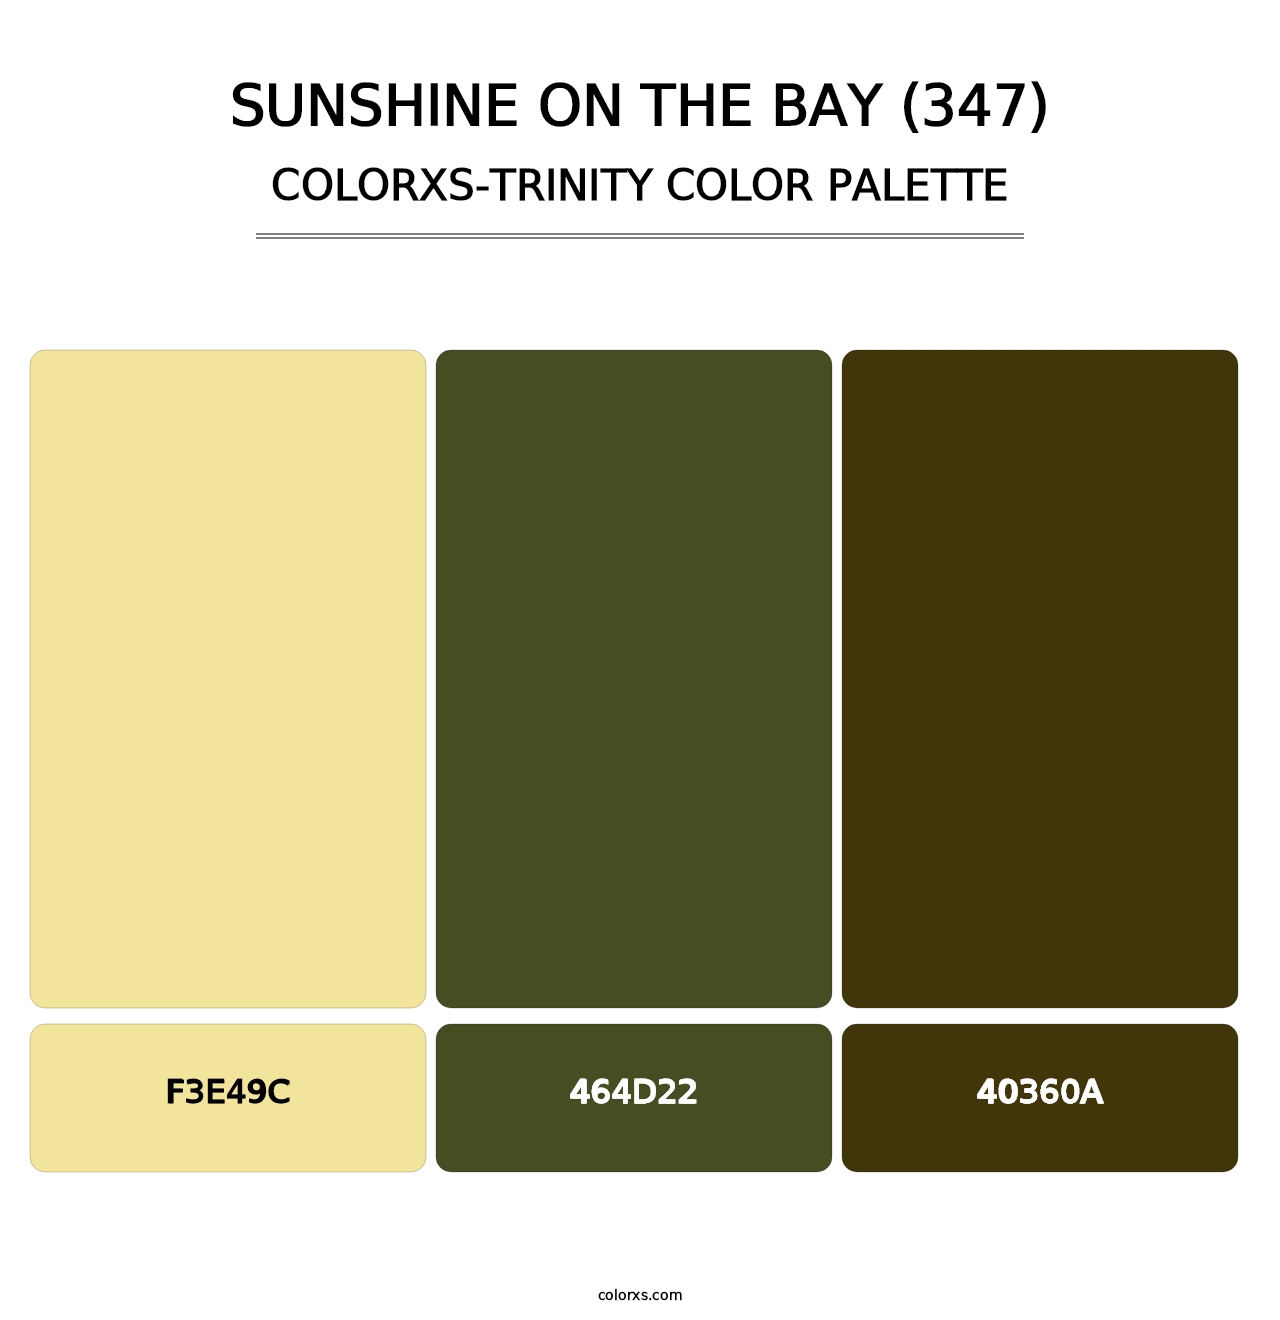 Sunshine on the Bay (347) - Colorxs Trinity Palette